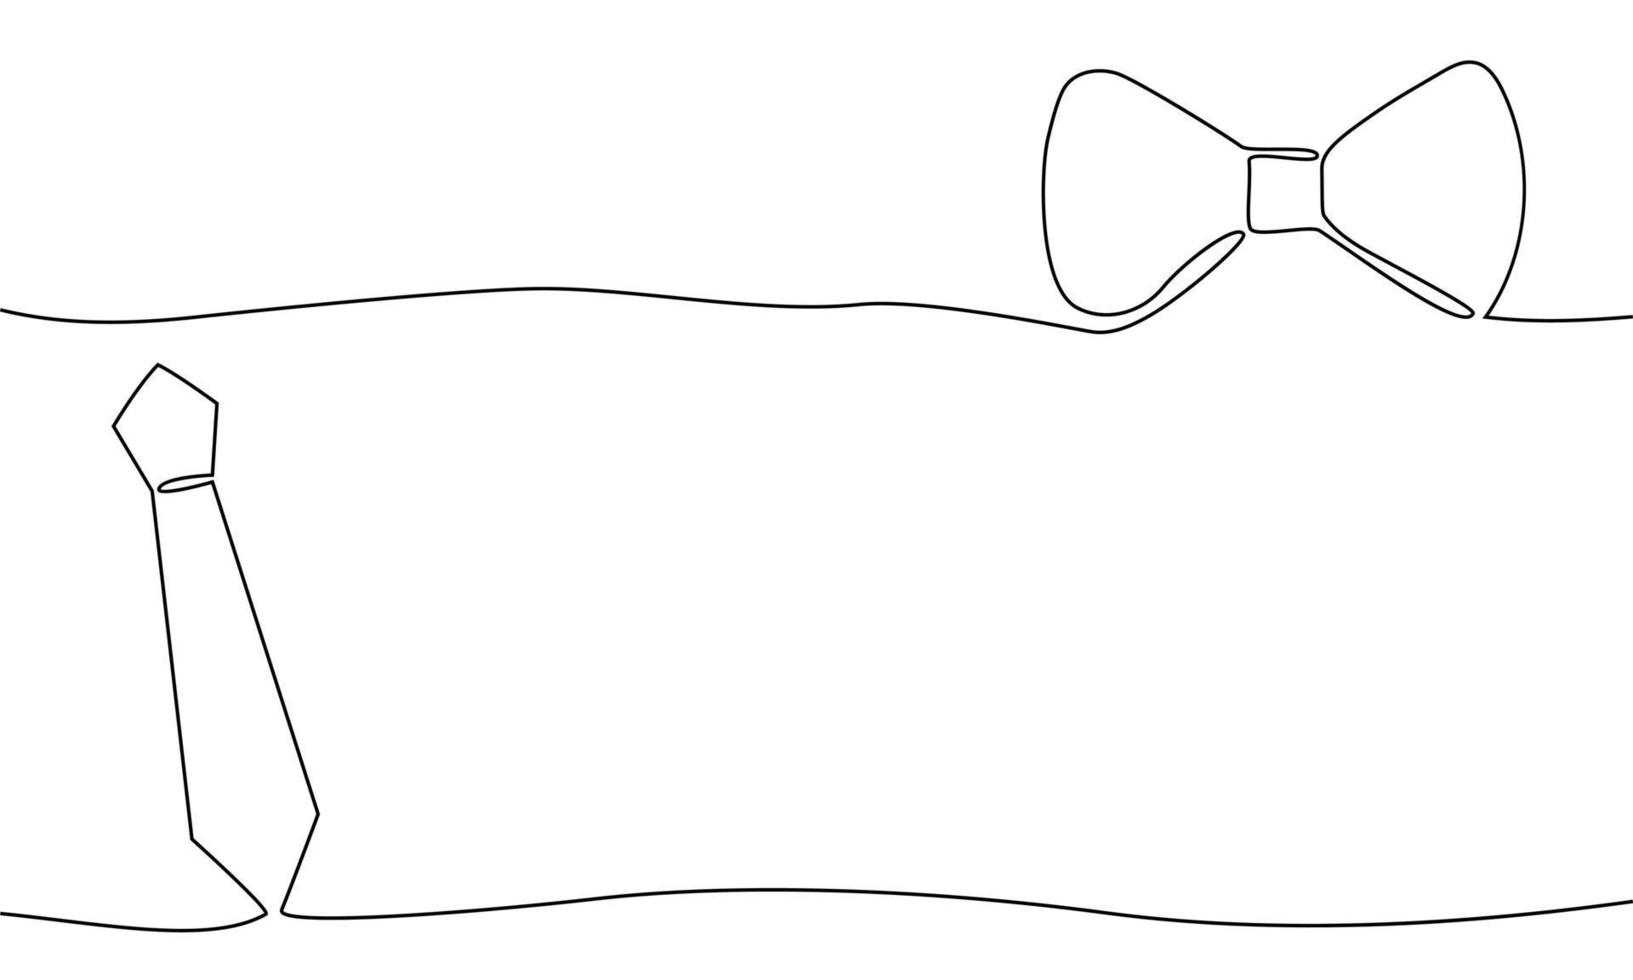 https://static.vecteezy.com/system/resources/previews/021/628/788/non_2x/line-art-tie-and-bow-tie-one-line-continuous-set-outline-illustration-vector.jpg